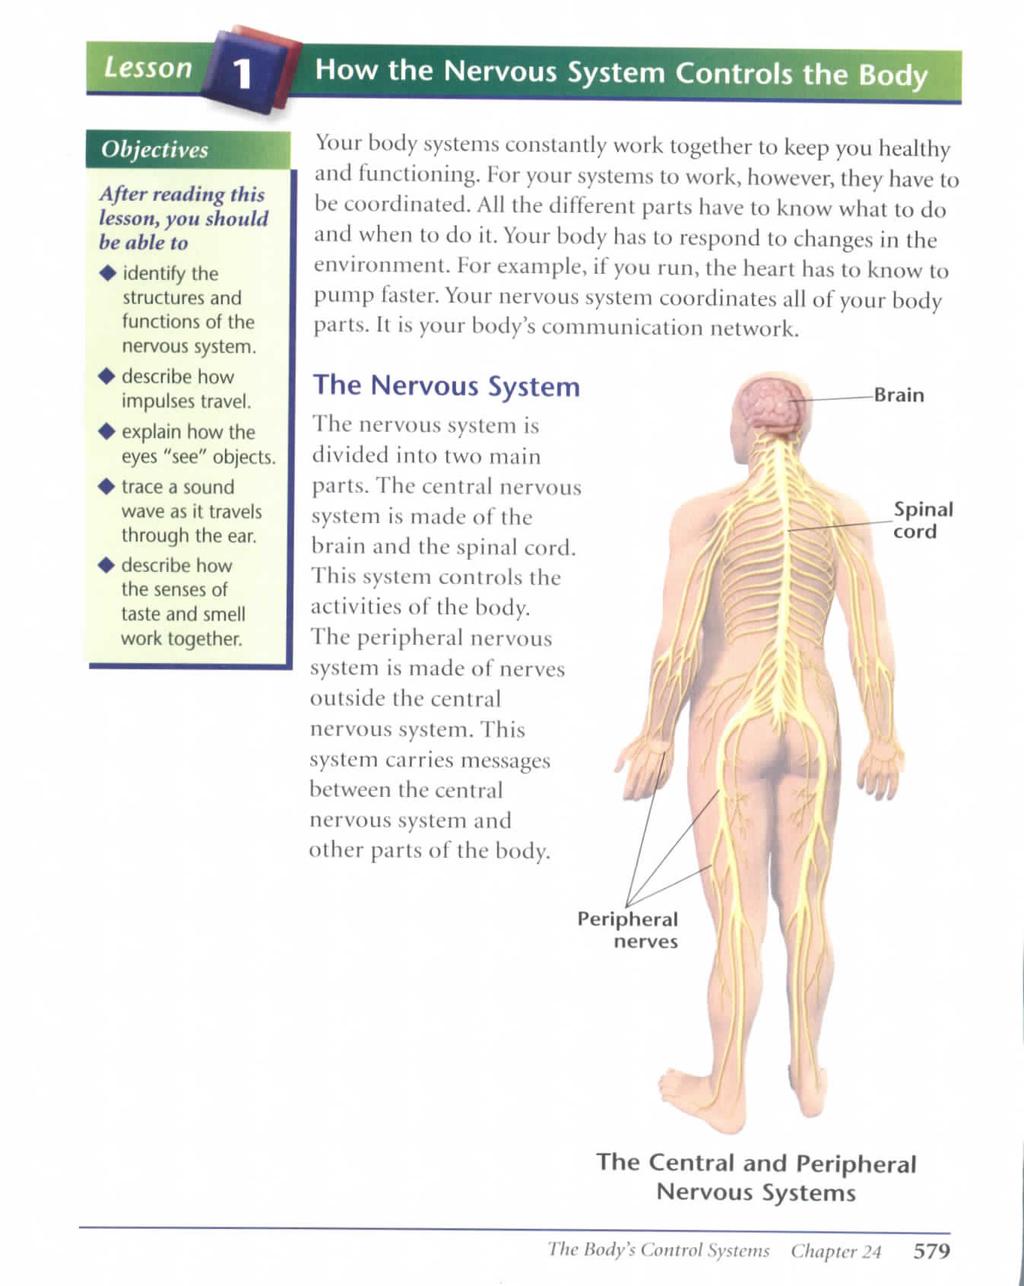 Lesson Objectives After reading this lesson, you should be able to + identify the structures and functions of the nervous system. ^ describe how impulses travel. ^ explain how the eyes "see" objects.